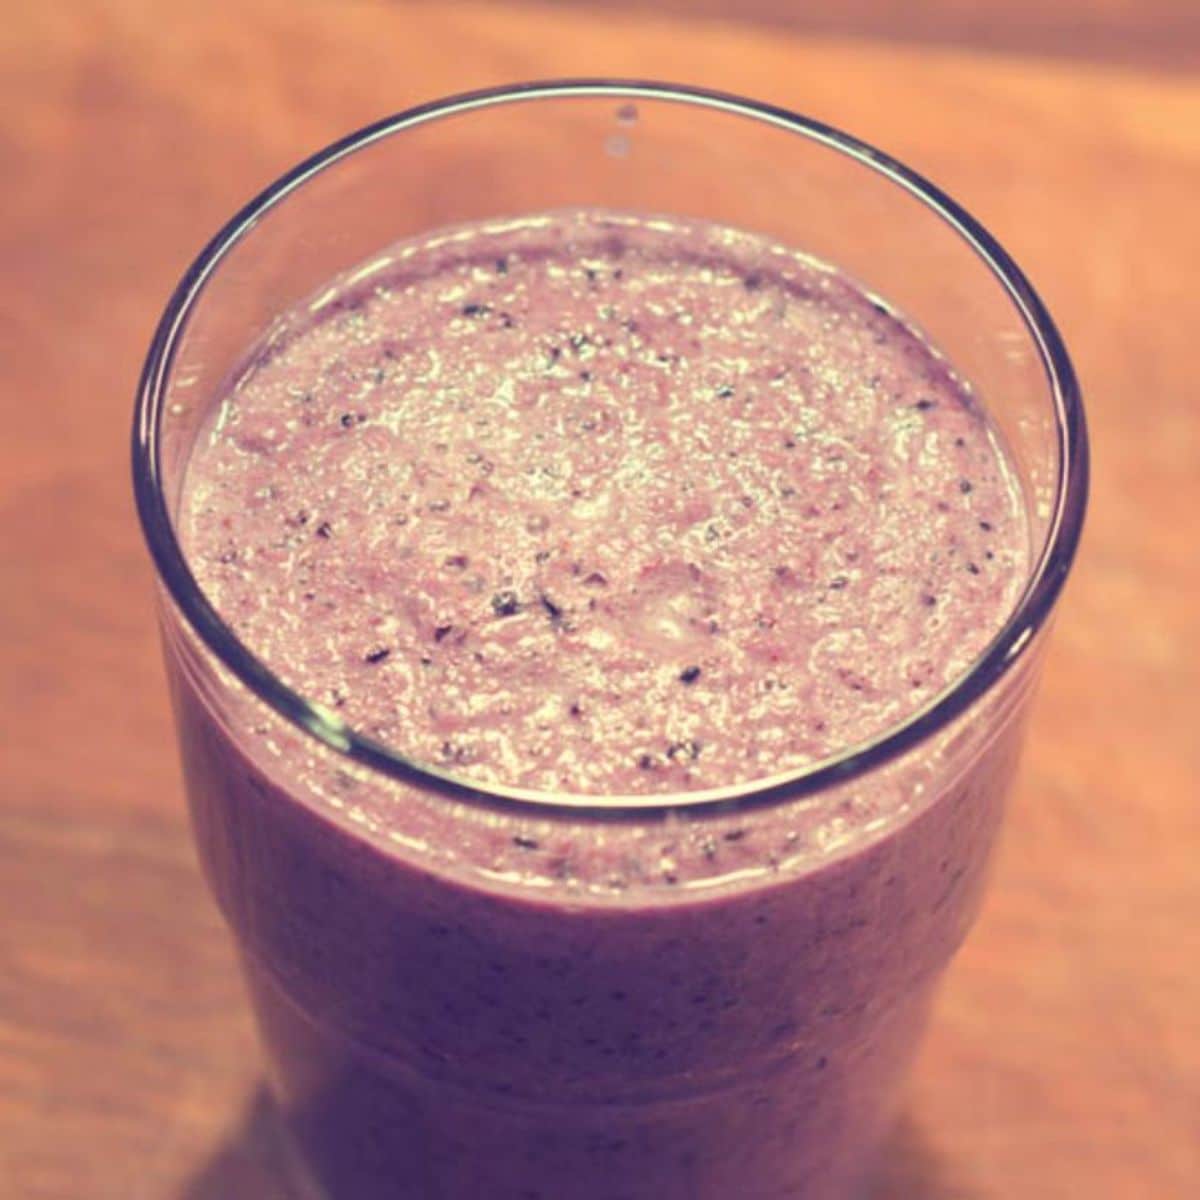 Blueberry cucumber smoothie Featured